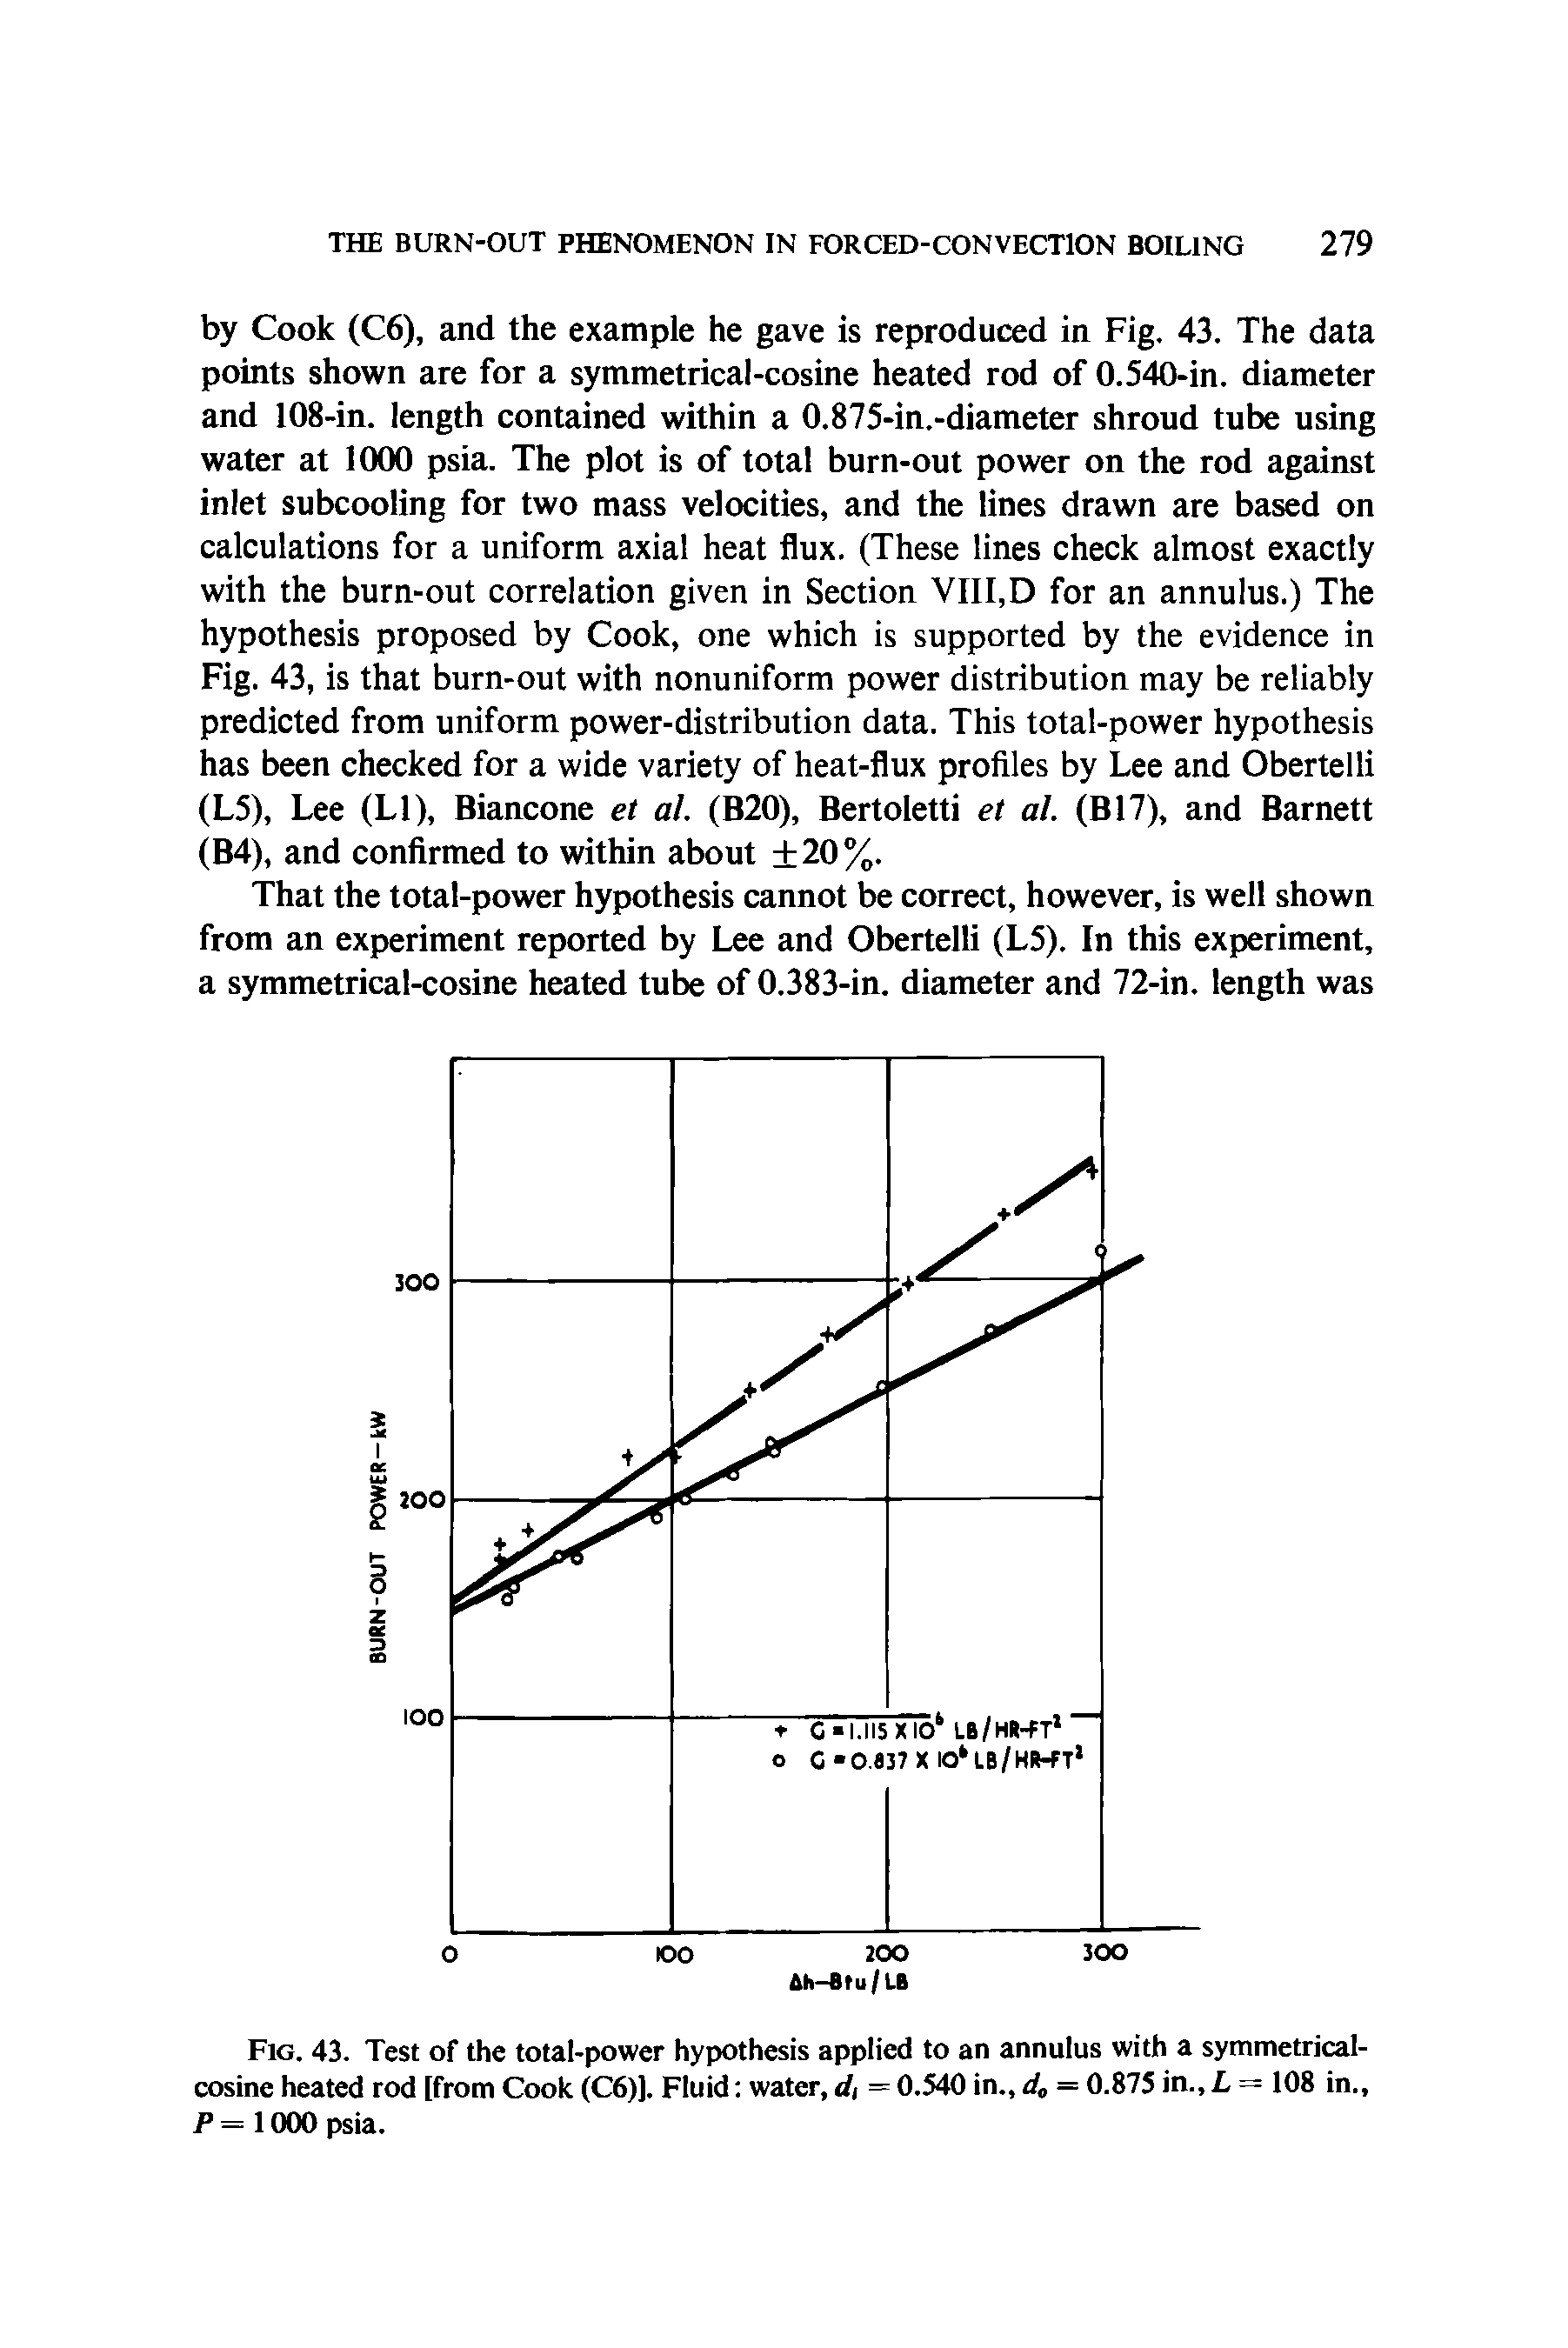 Fig. 43. Test of the total-power hypothesis applied to an annulus with a symmetrical-cosine heated rod [from Cook (C6)]. Fluid water, d, = 0.540 in., d = 0.875 in., L = 108 in., P = 1000 psia.